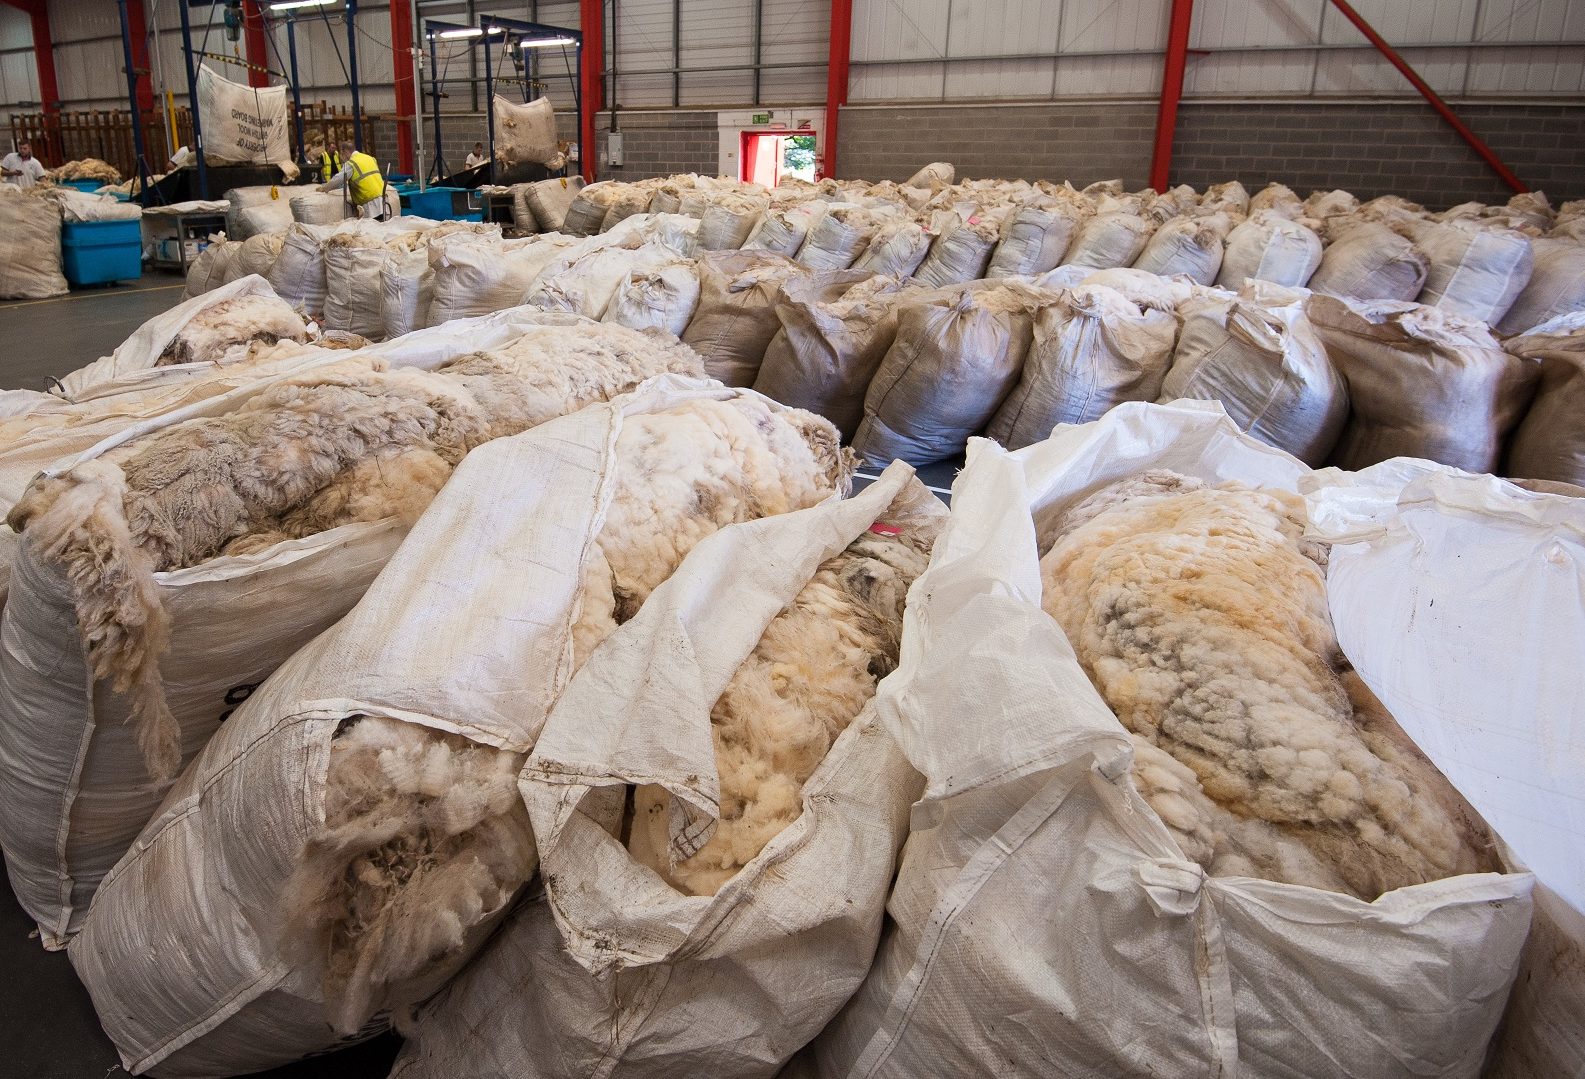 Bags of wool are building up at the British Wool depot, much of it unsold from 2019.